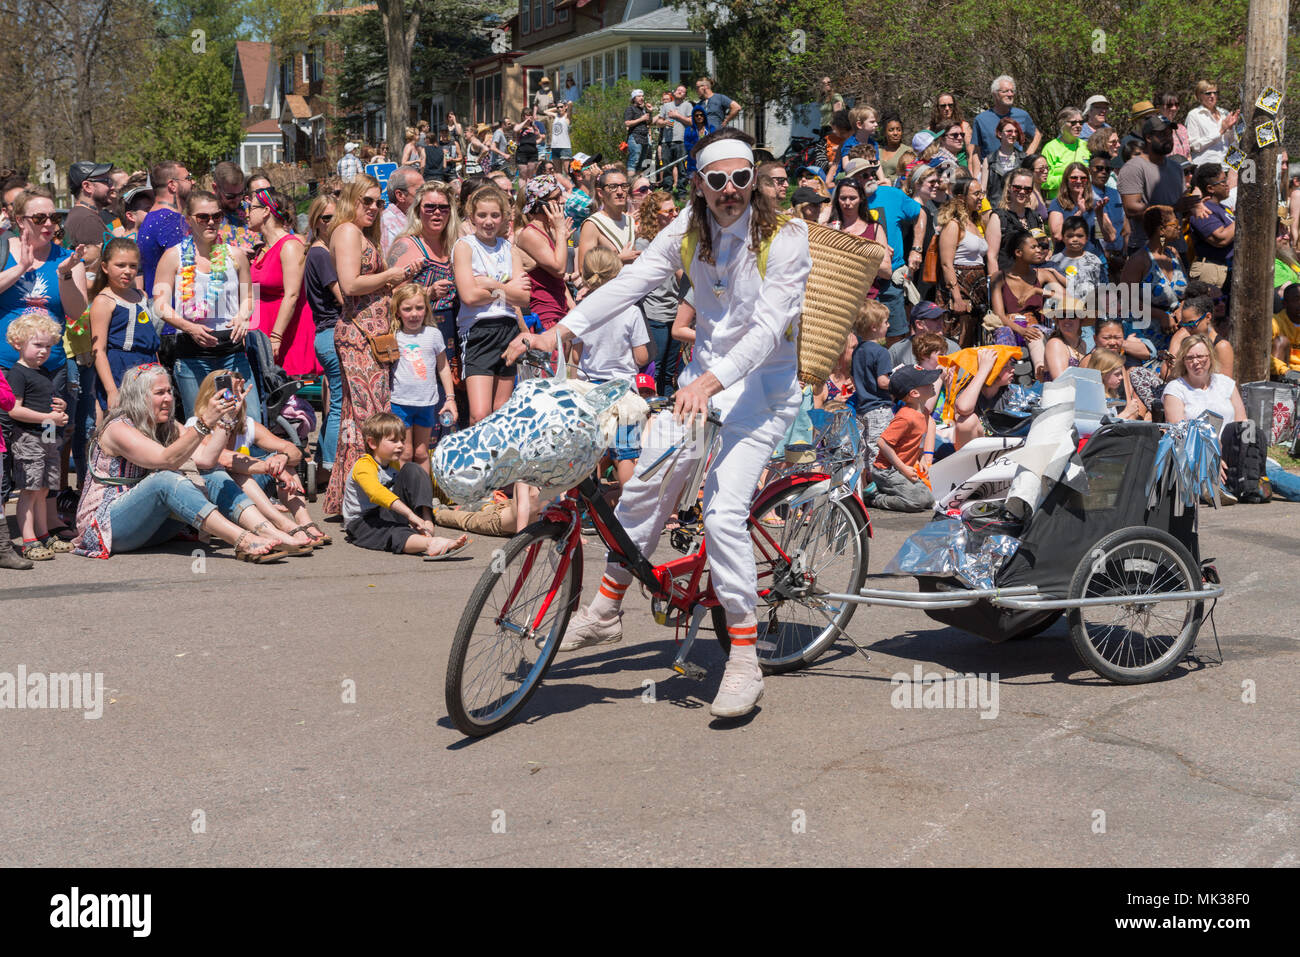 MINNEAPOLIS - May 6, 2018: A man has transformed his bicycle into a shiny unicorn for Minneapolis’ yearly May Day parade. Organized by In the Heart of the Beast Puppet and Mask Theatre, the parade, ceremony, and festival is in its 44th year. Credit: Nicholas Neufeld/Alamy Live News Stock Photo